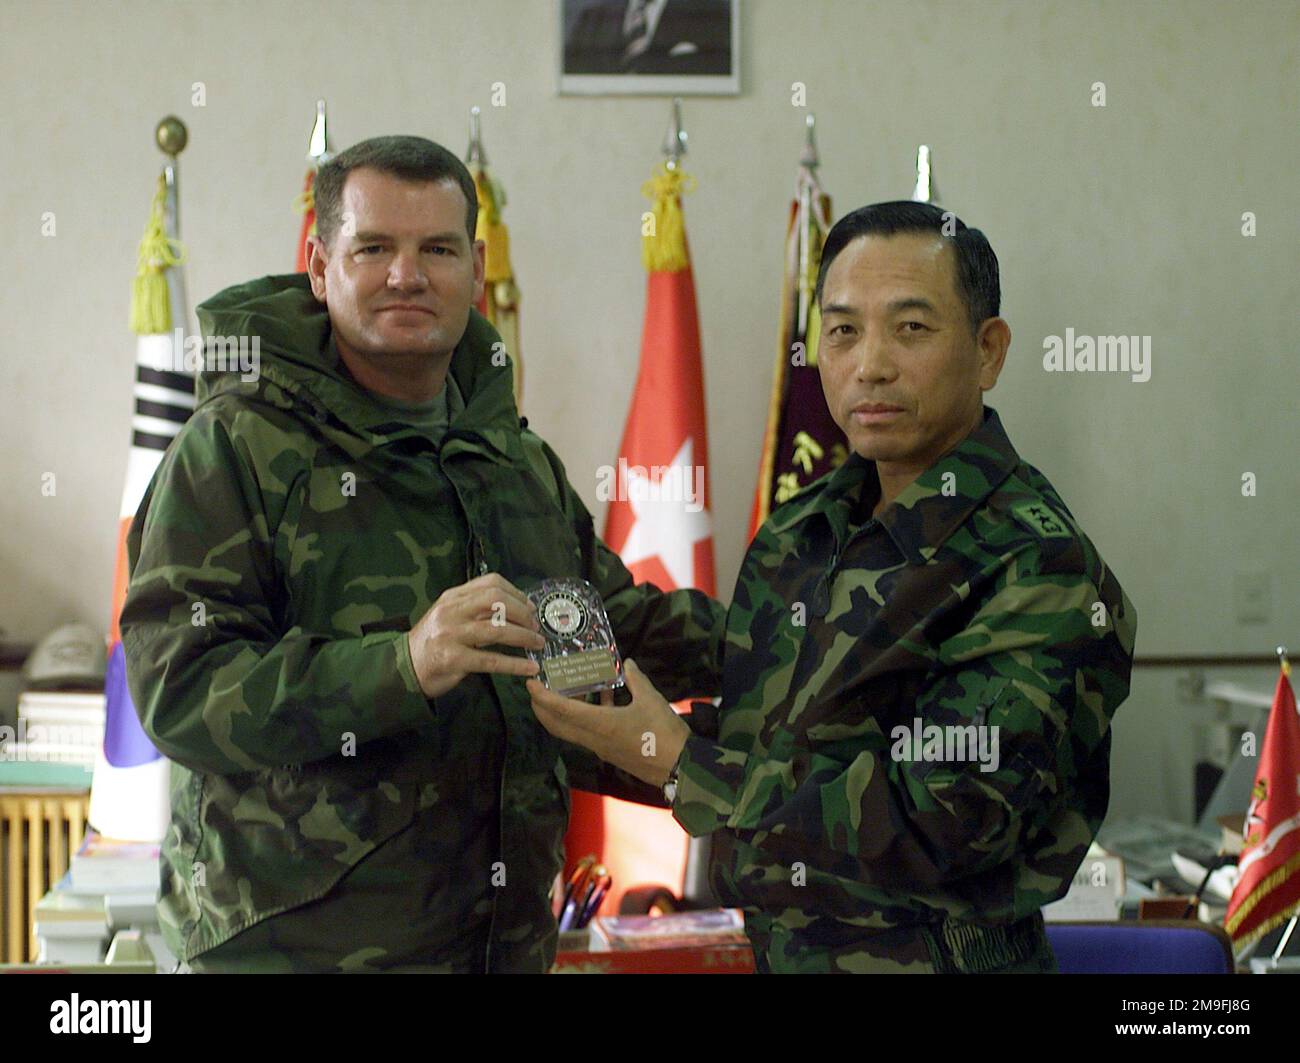 Chaplin Edward L. Milliner 2nd Battalion, 7th Marines Regiment, presents Major General Sang Kee Bae 1ST Battalion, 7th Marine Regiment, with a token of all the Marines appreciation for his cooperation with Korean Intergrated Training Program (KITP). KITP is a one and a half month joint training in conjunction with the Republic of Korea (ROK) Marines that takes place in Pohang, Korea, Marine Expeditionary Camp Pohang (MEC-P). Base: Mec-Pohang Country: Republic Of Korea (KOR) Stock Photo